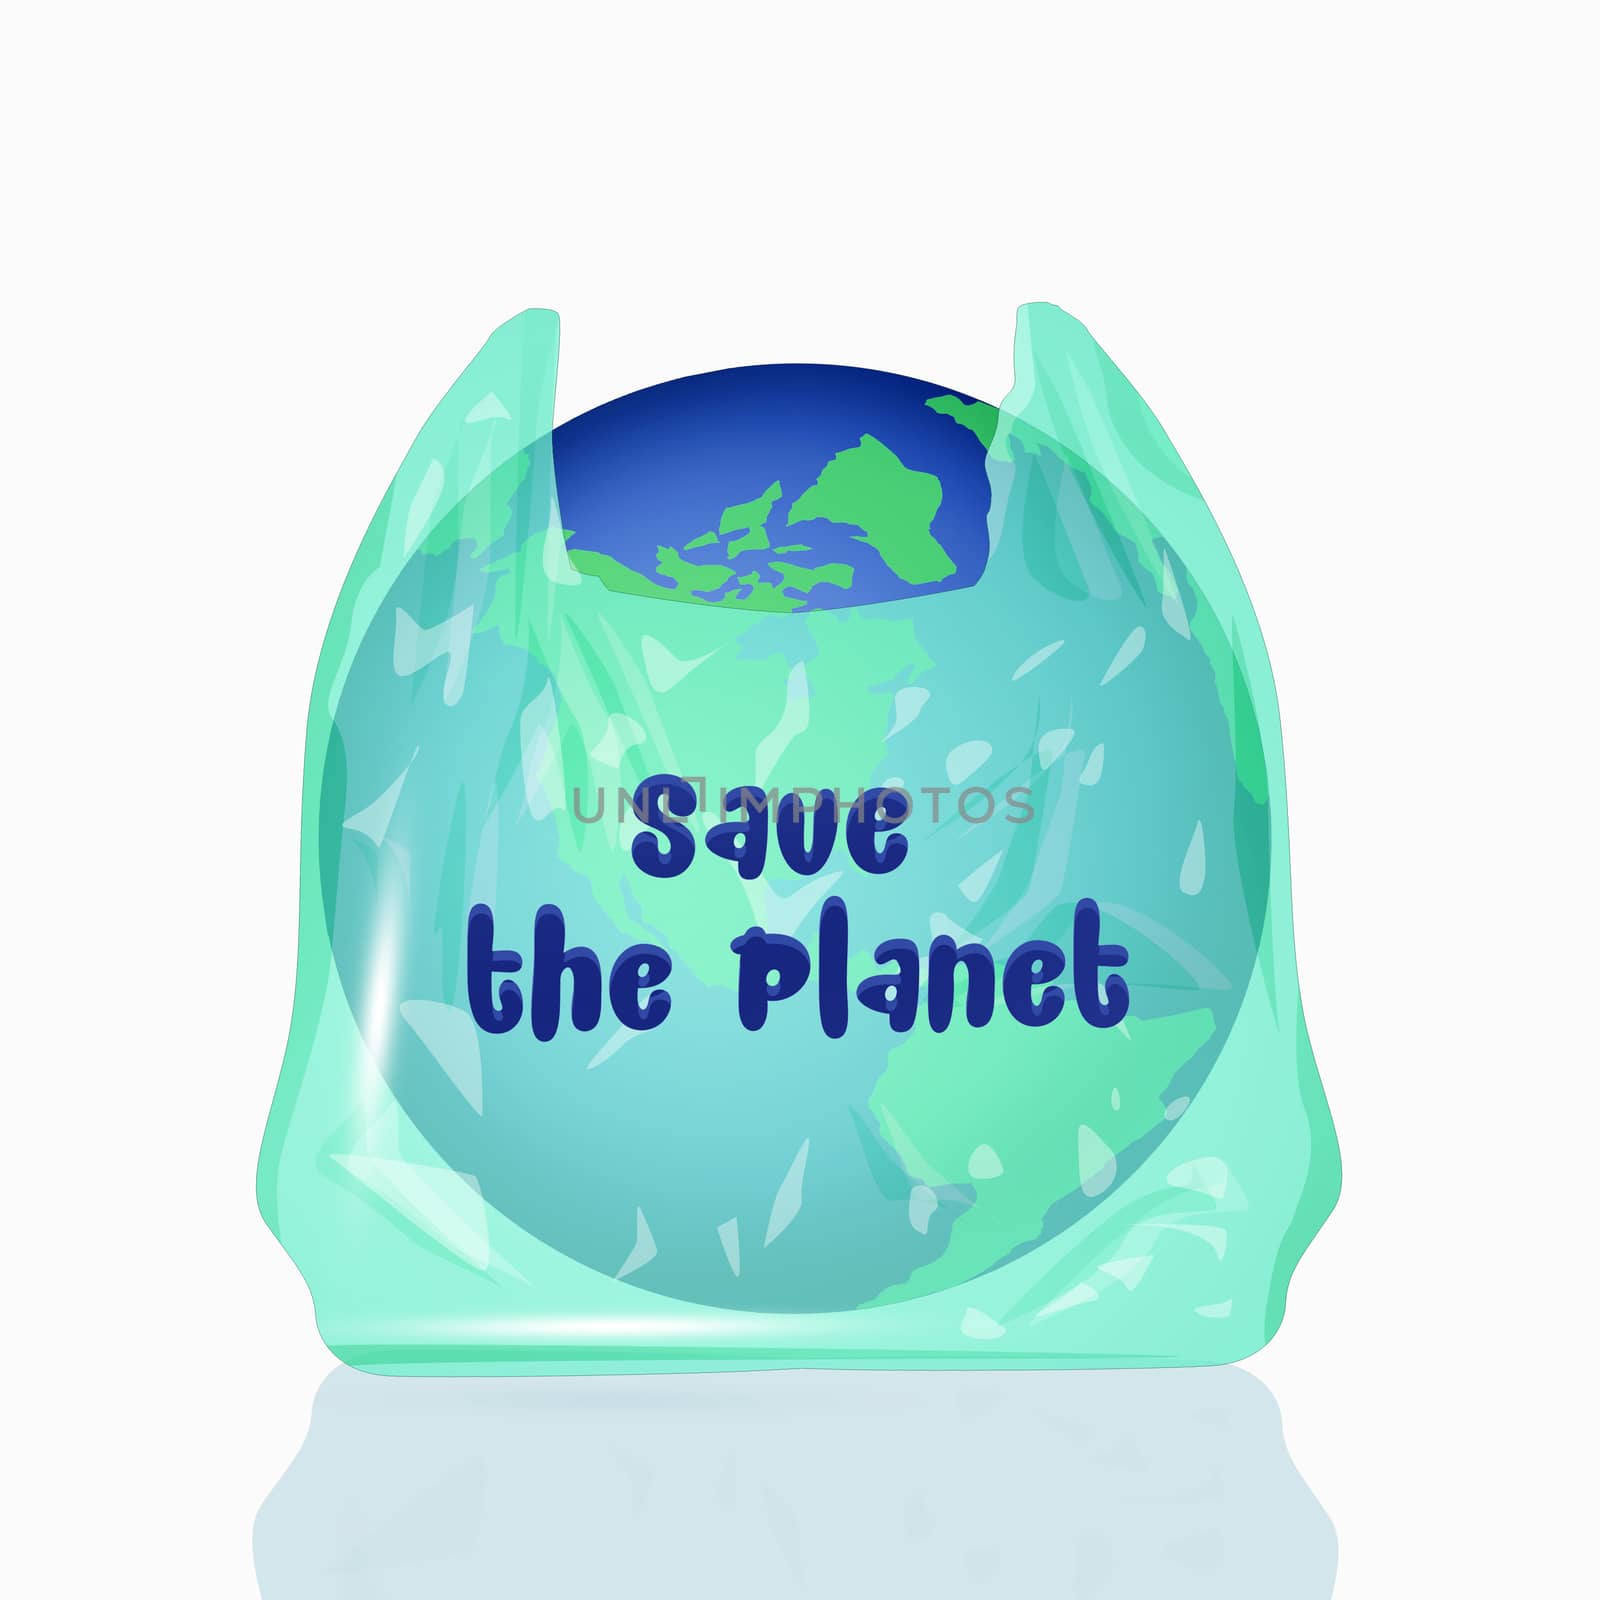 illustration of save the planet from plastic